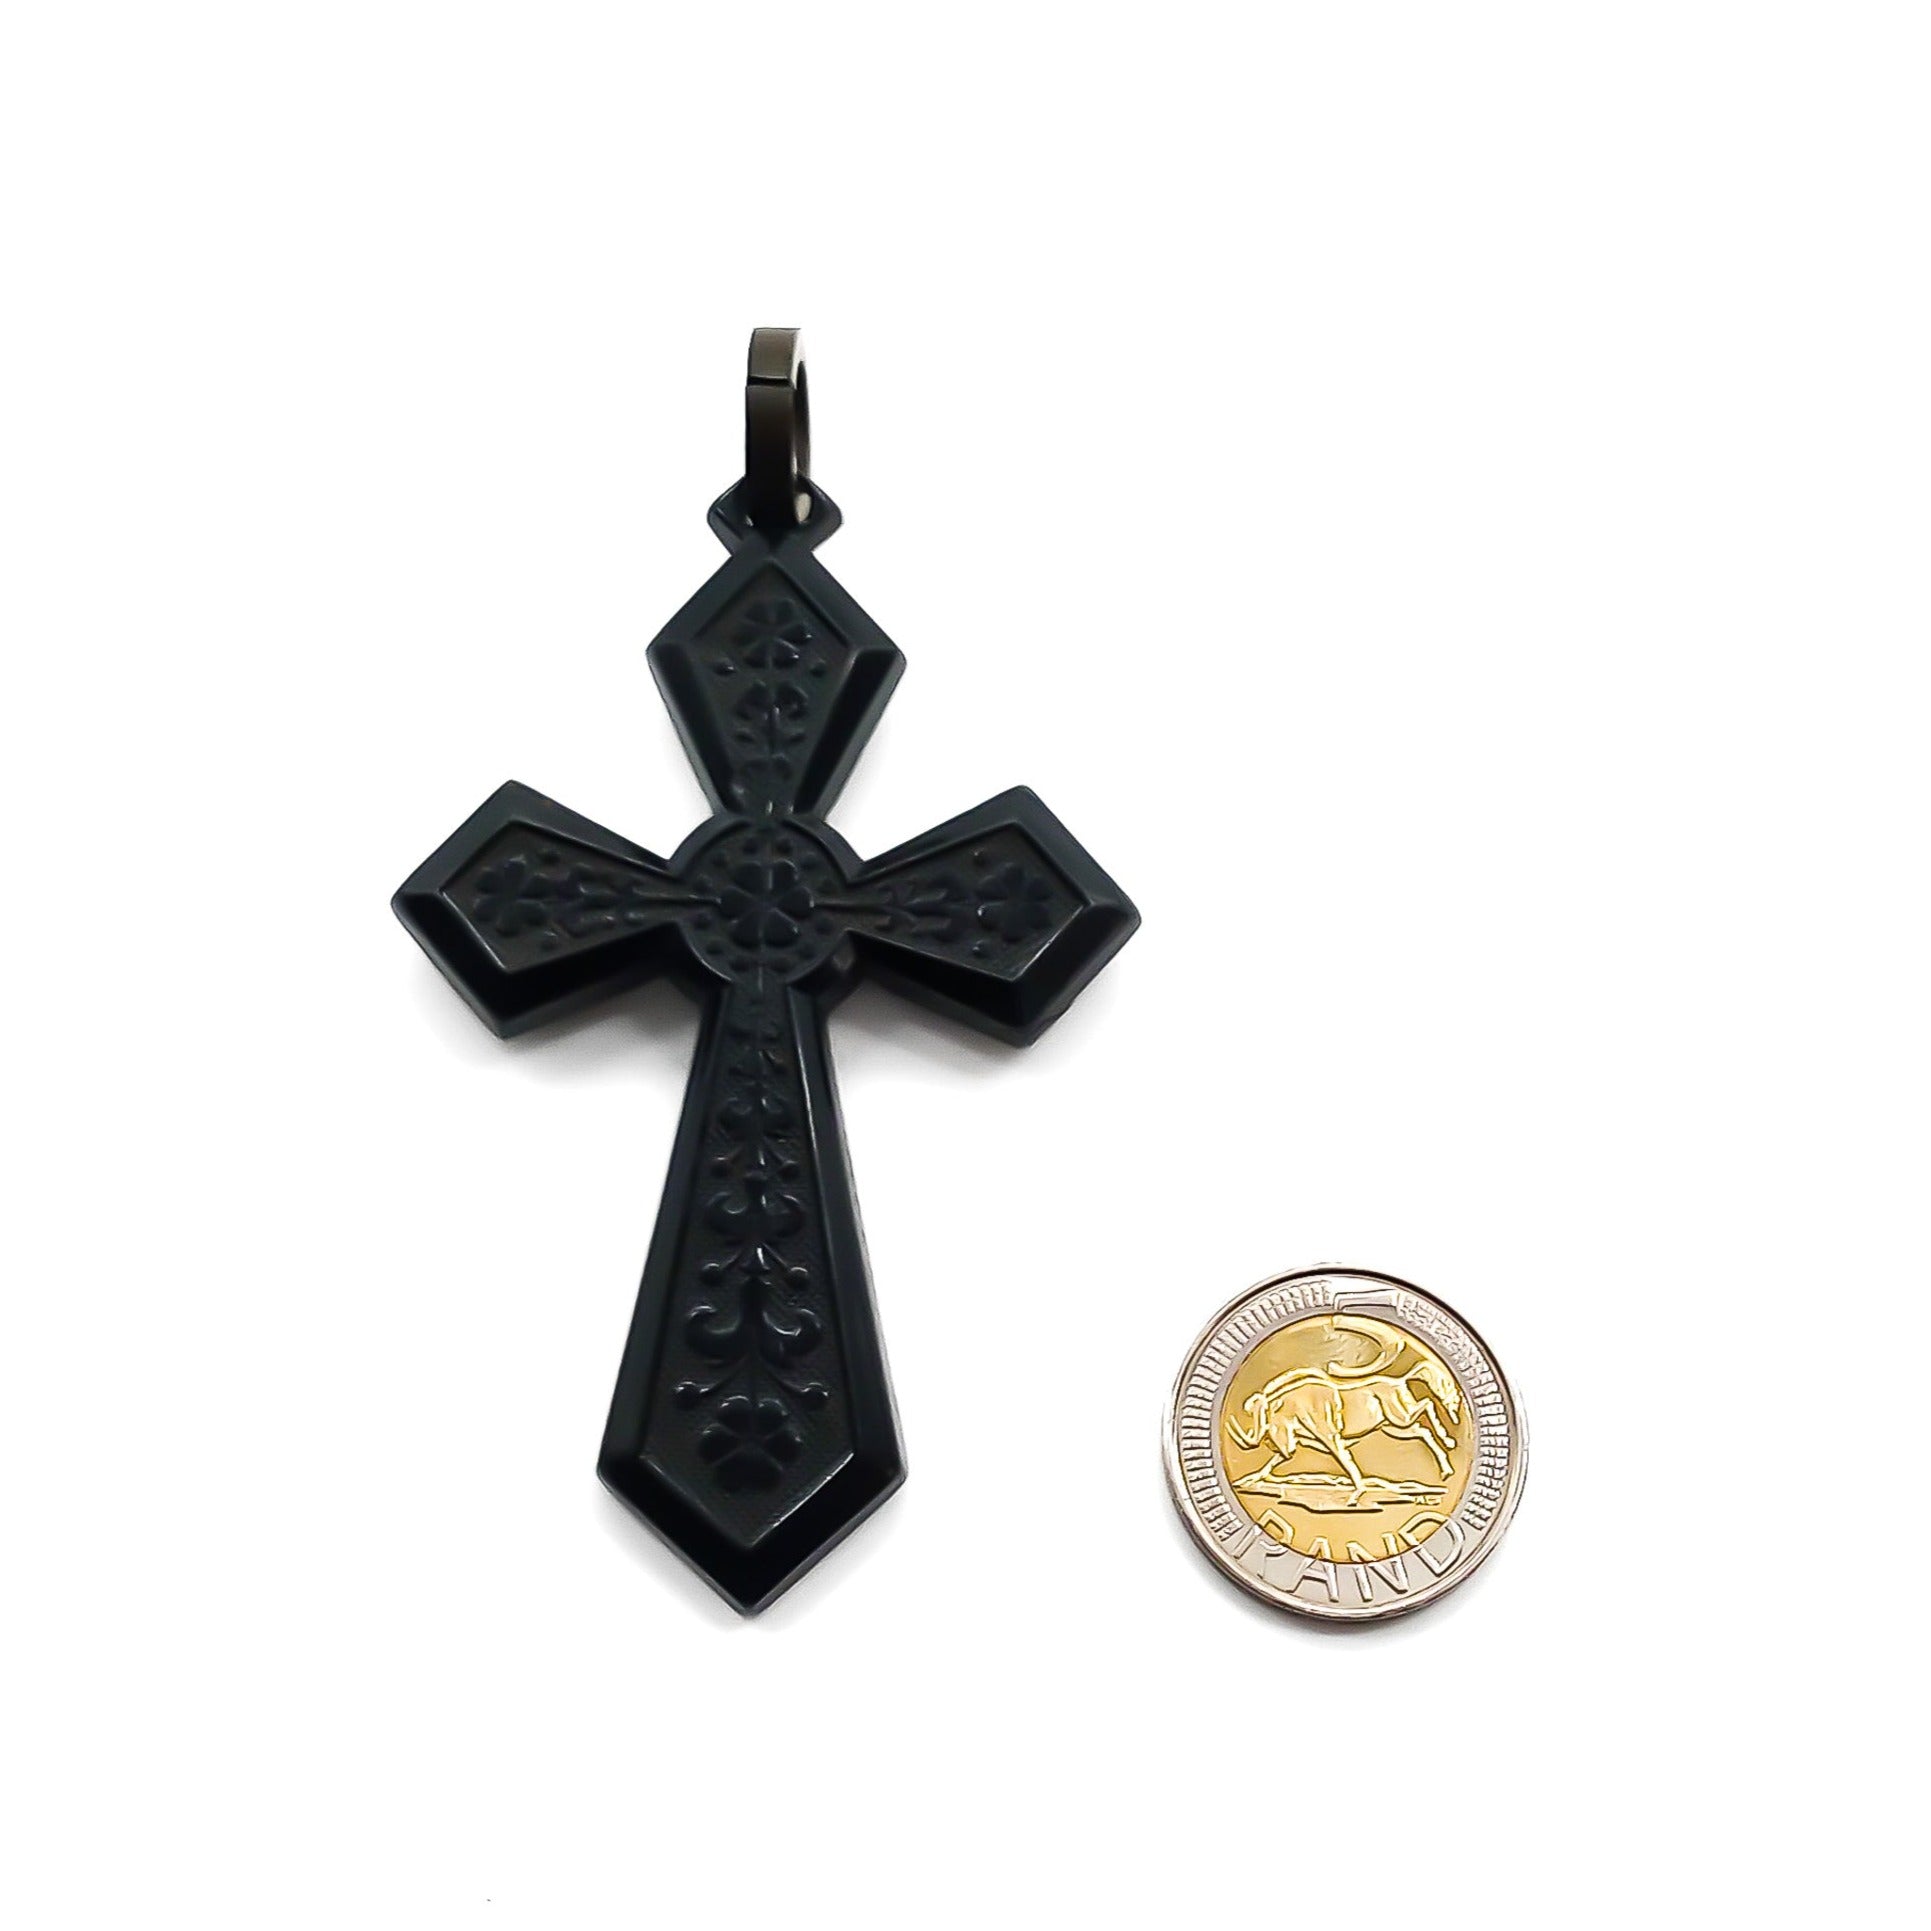 Large beautifully carved Victorian jet cross pendant.